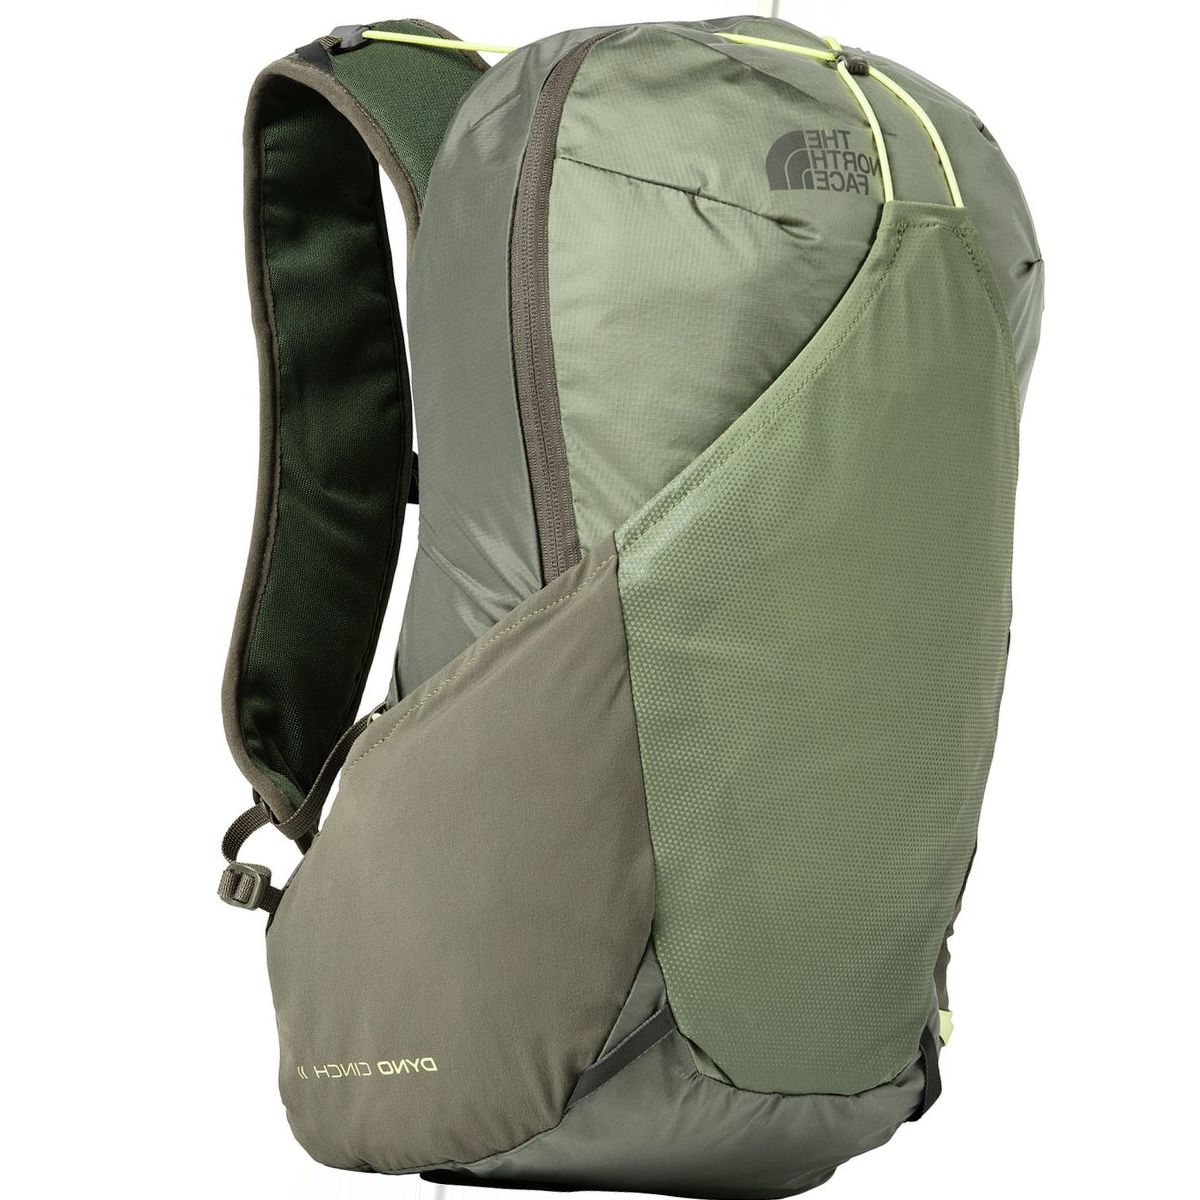 The North Face Chimera 24L Backpack - Women's